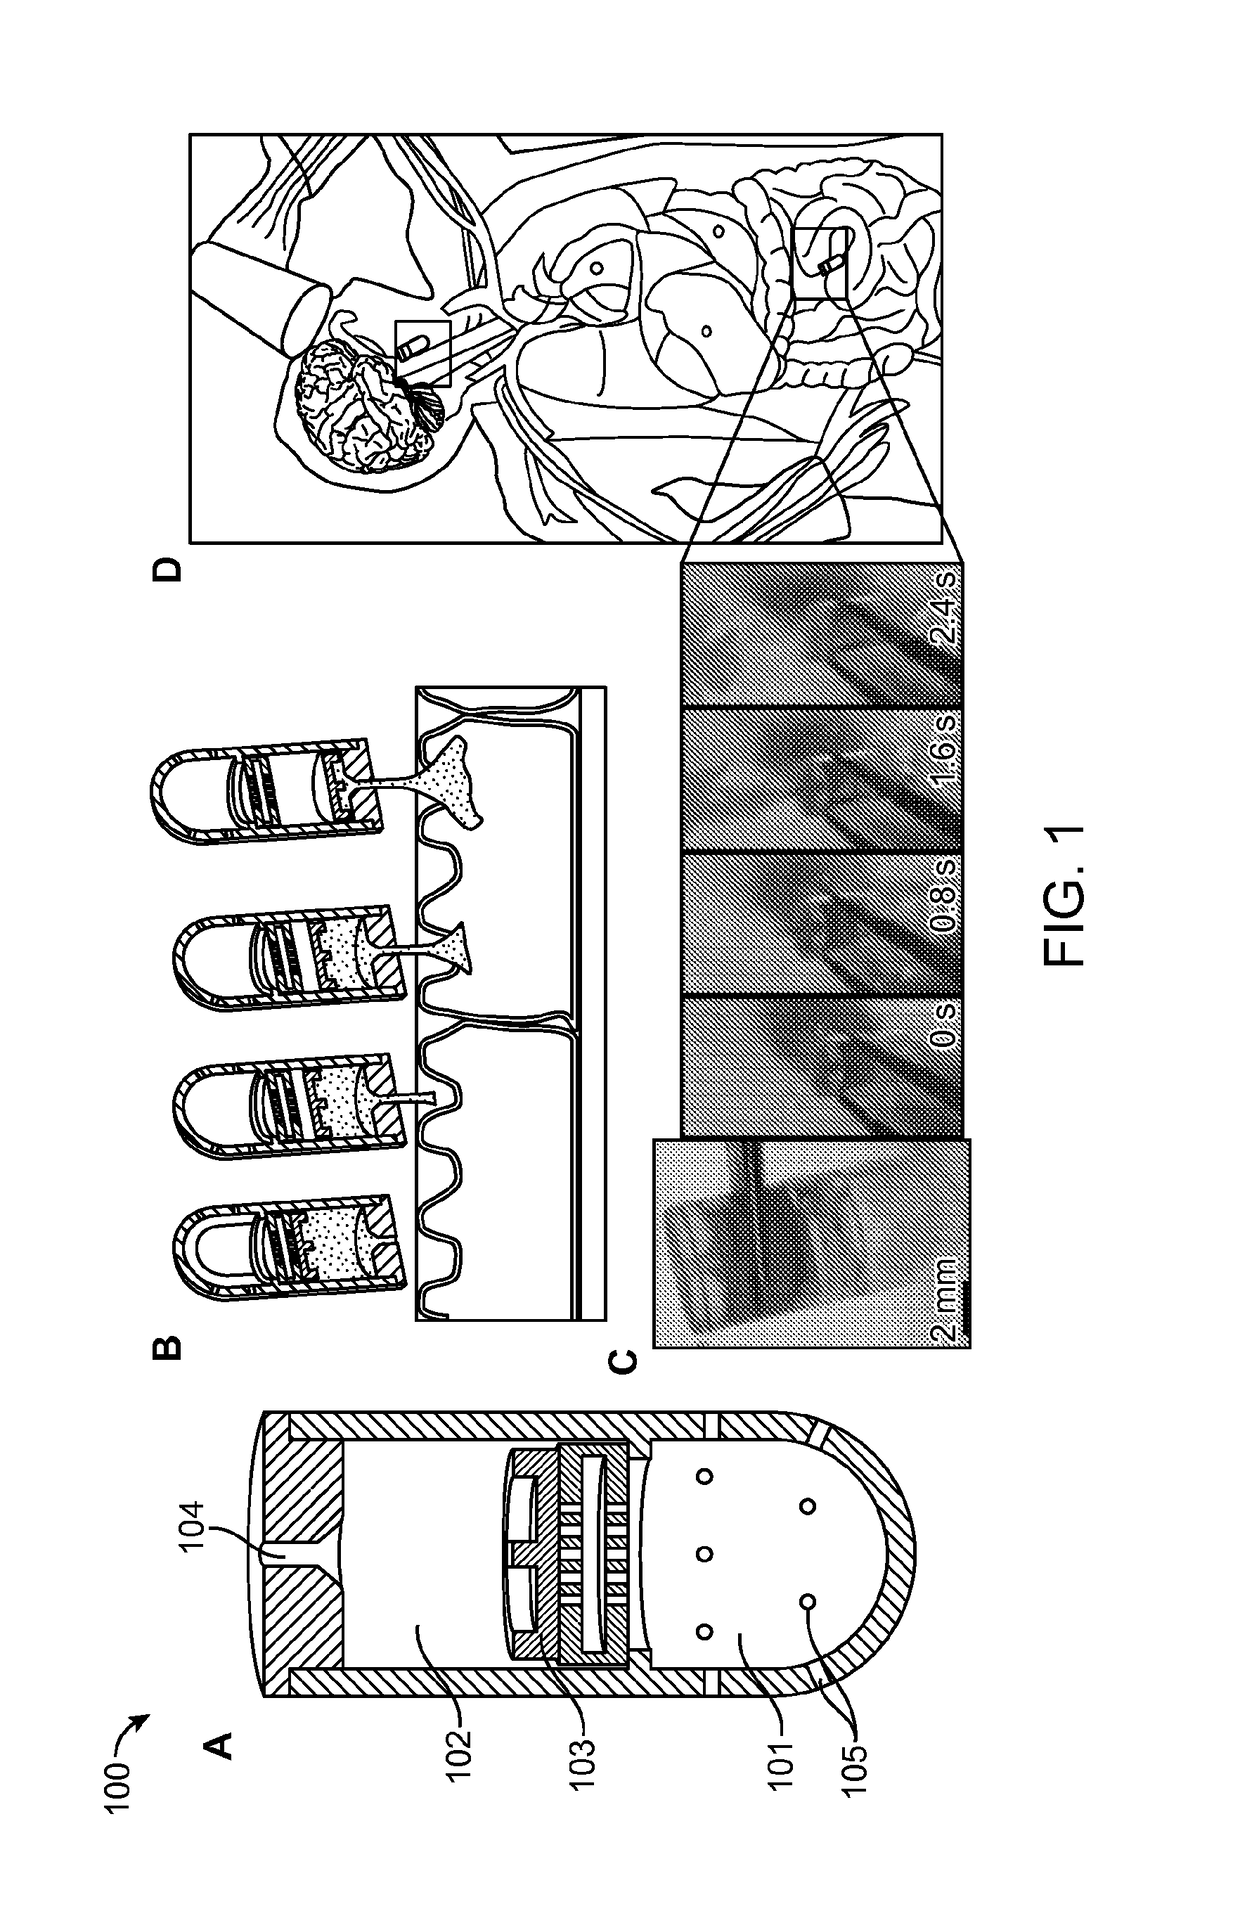 Active Agent Delivery Devices and Methods of Using the Same